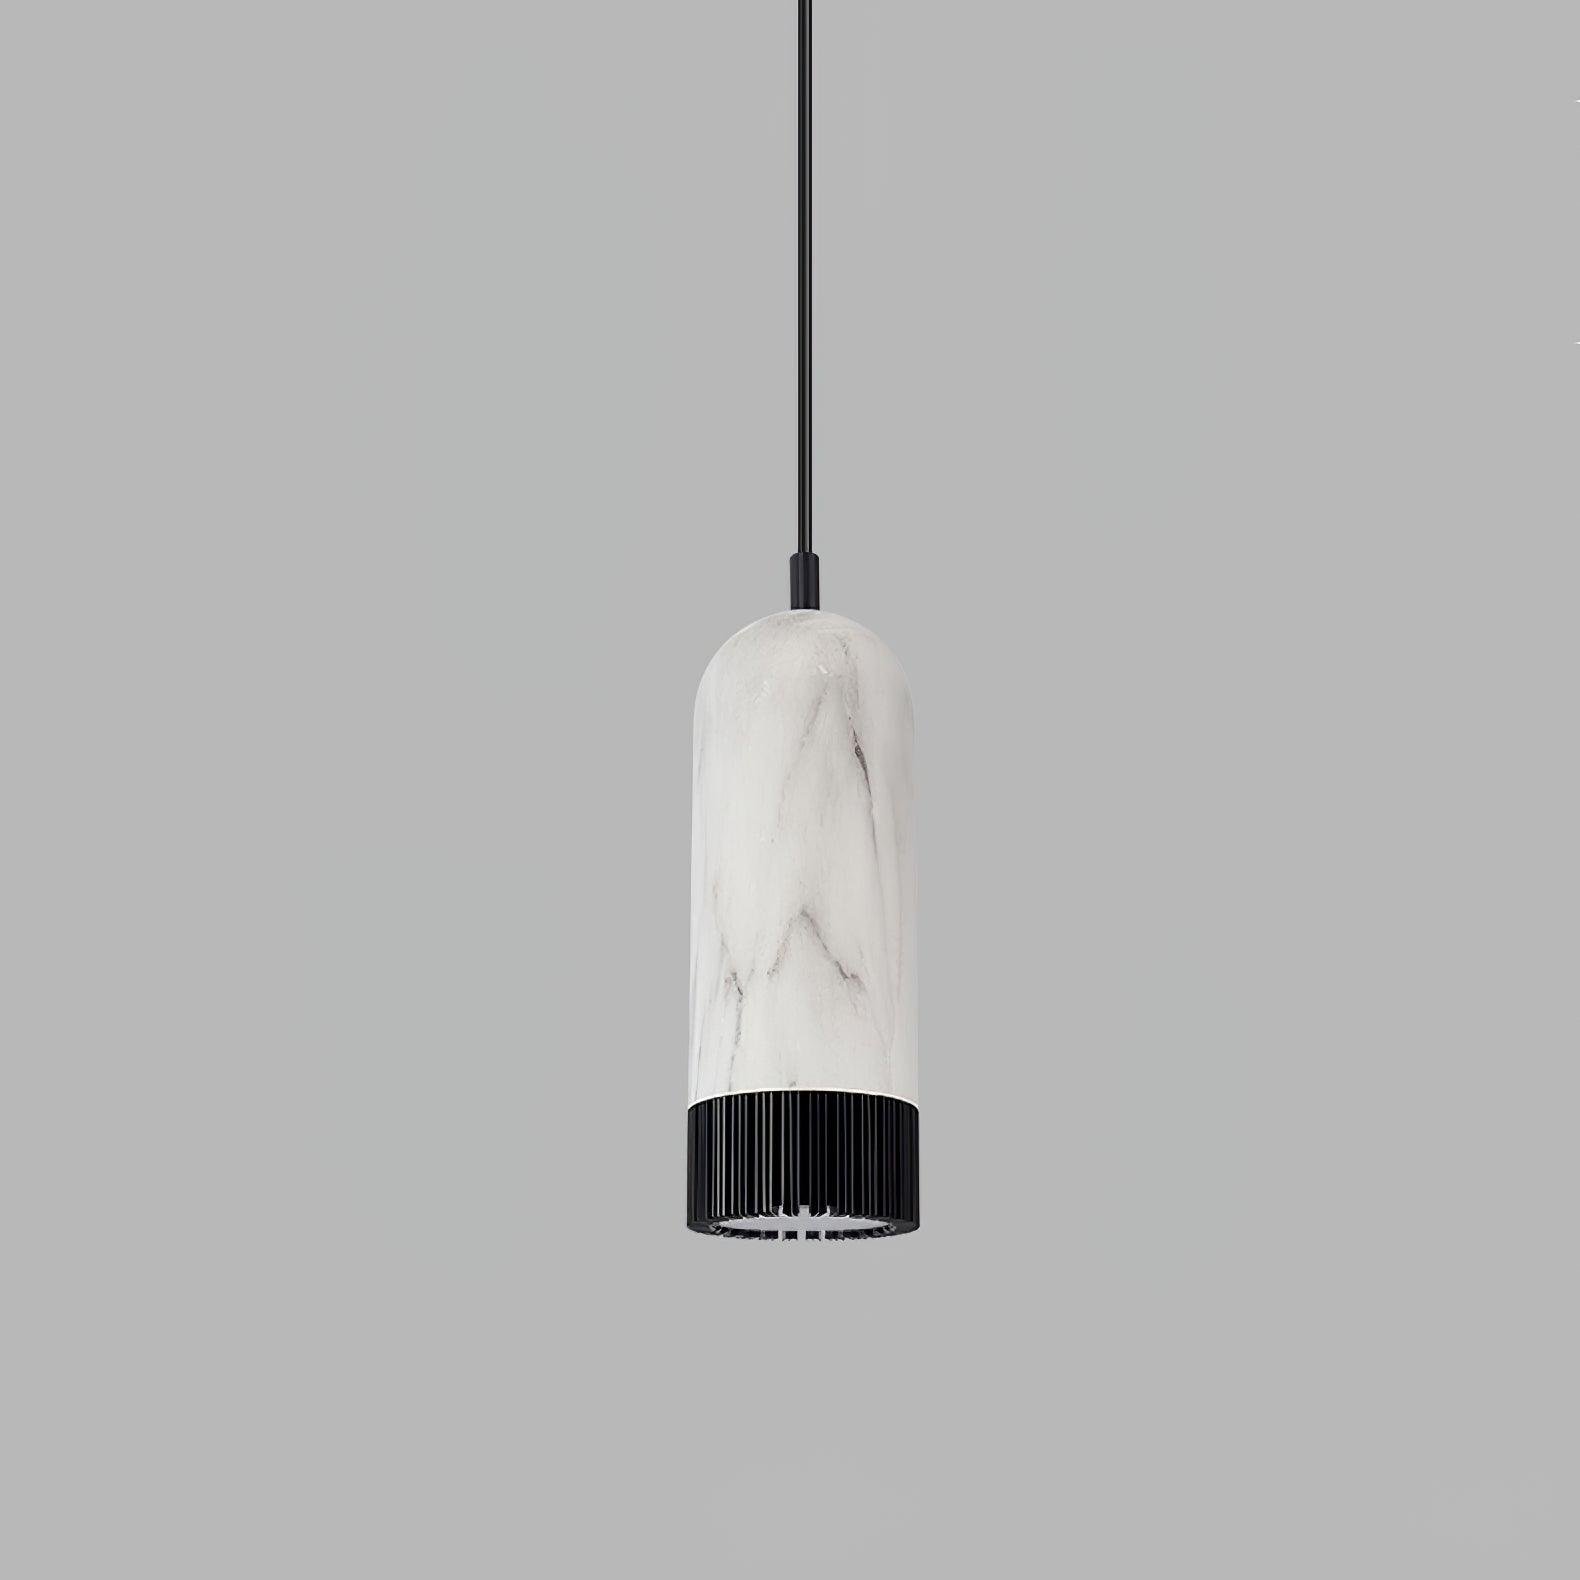 Black and White Maddy Pendant Light with Cool Light, 3.1" in diameter and 7.9" in height (or 8cm x 20cm)